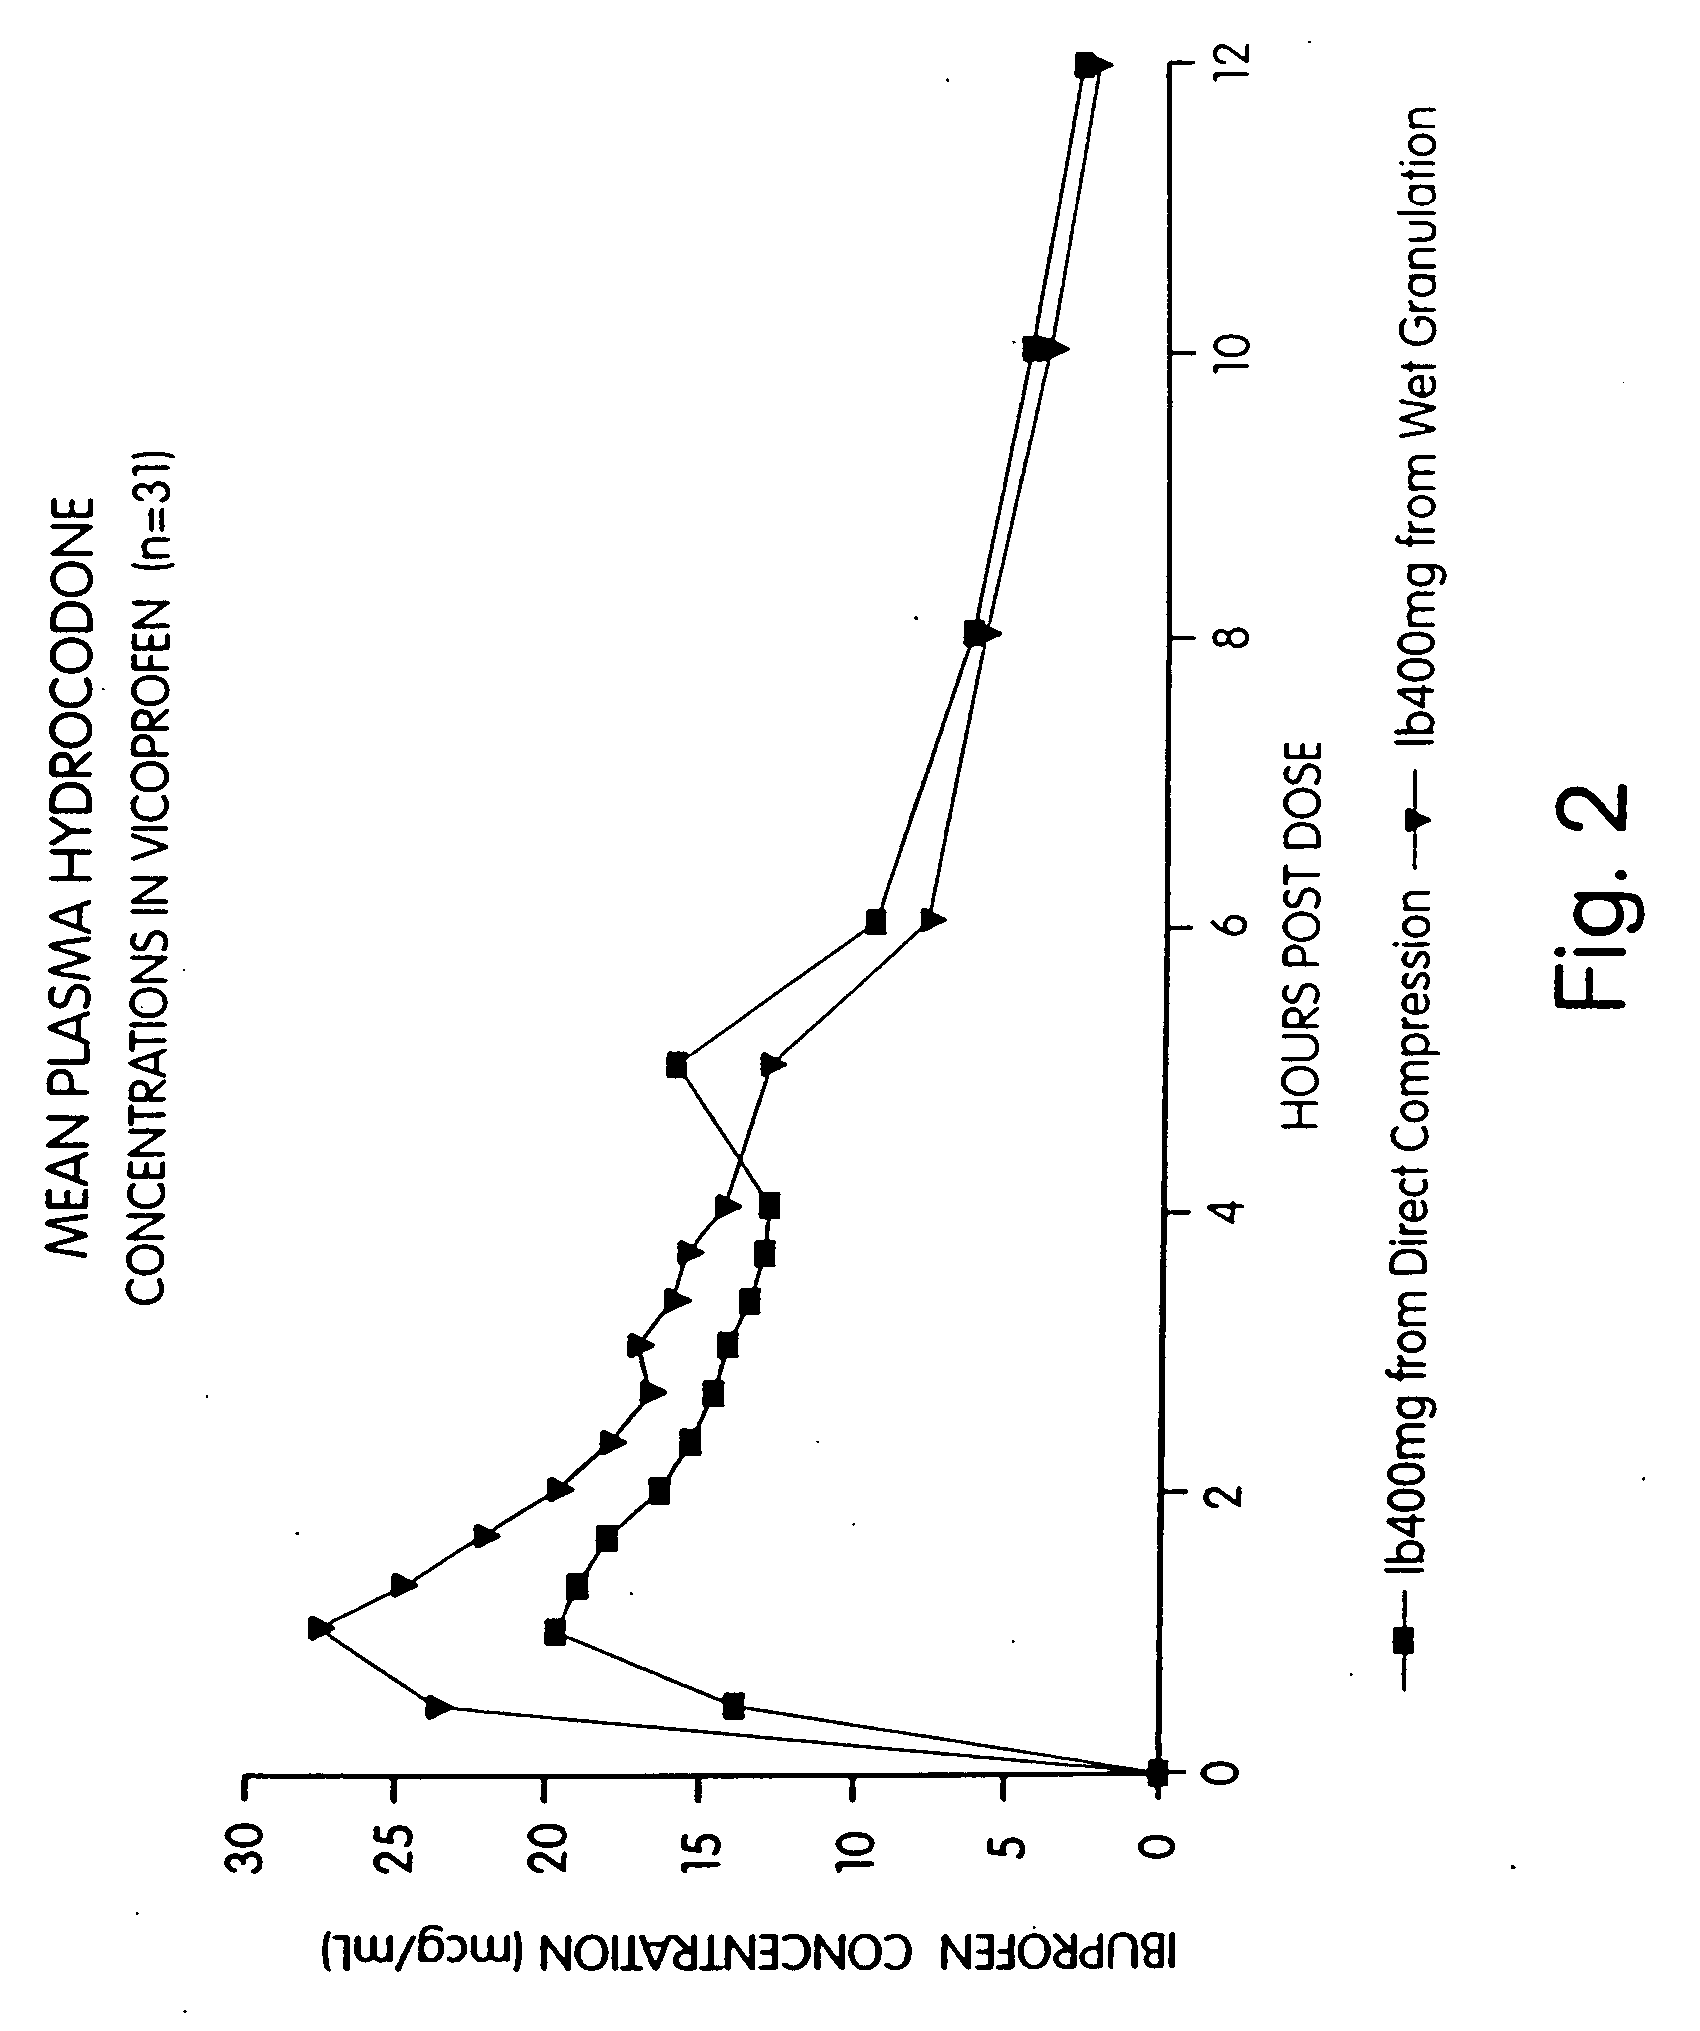 Ibuprofen and narcotic analgesic compositions